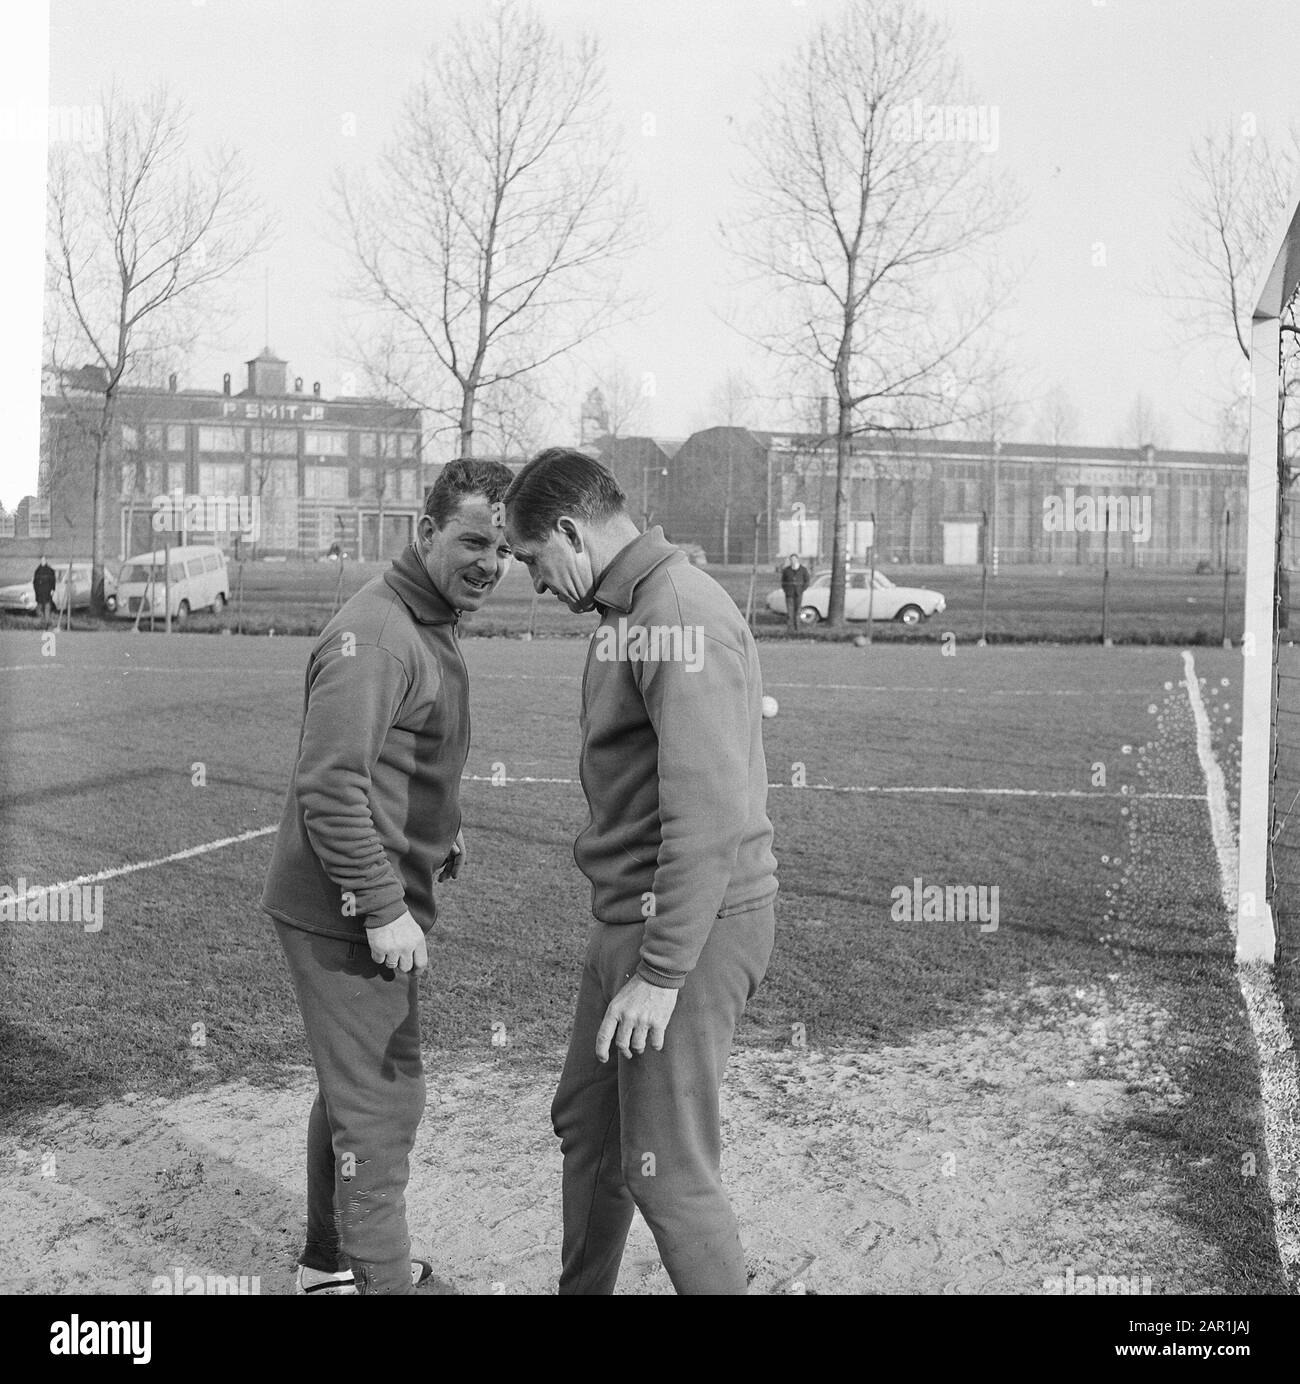 Reinier Krijemaat trains, here taken care of by trainer Kment Date: January 6, 1966 Keywords: trainers Stock Photo